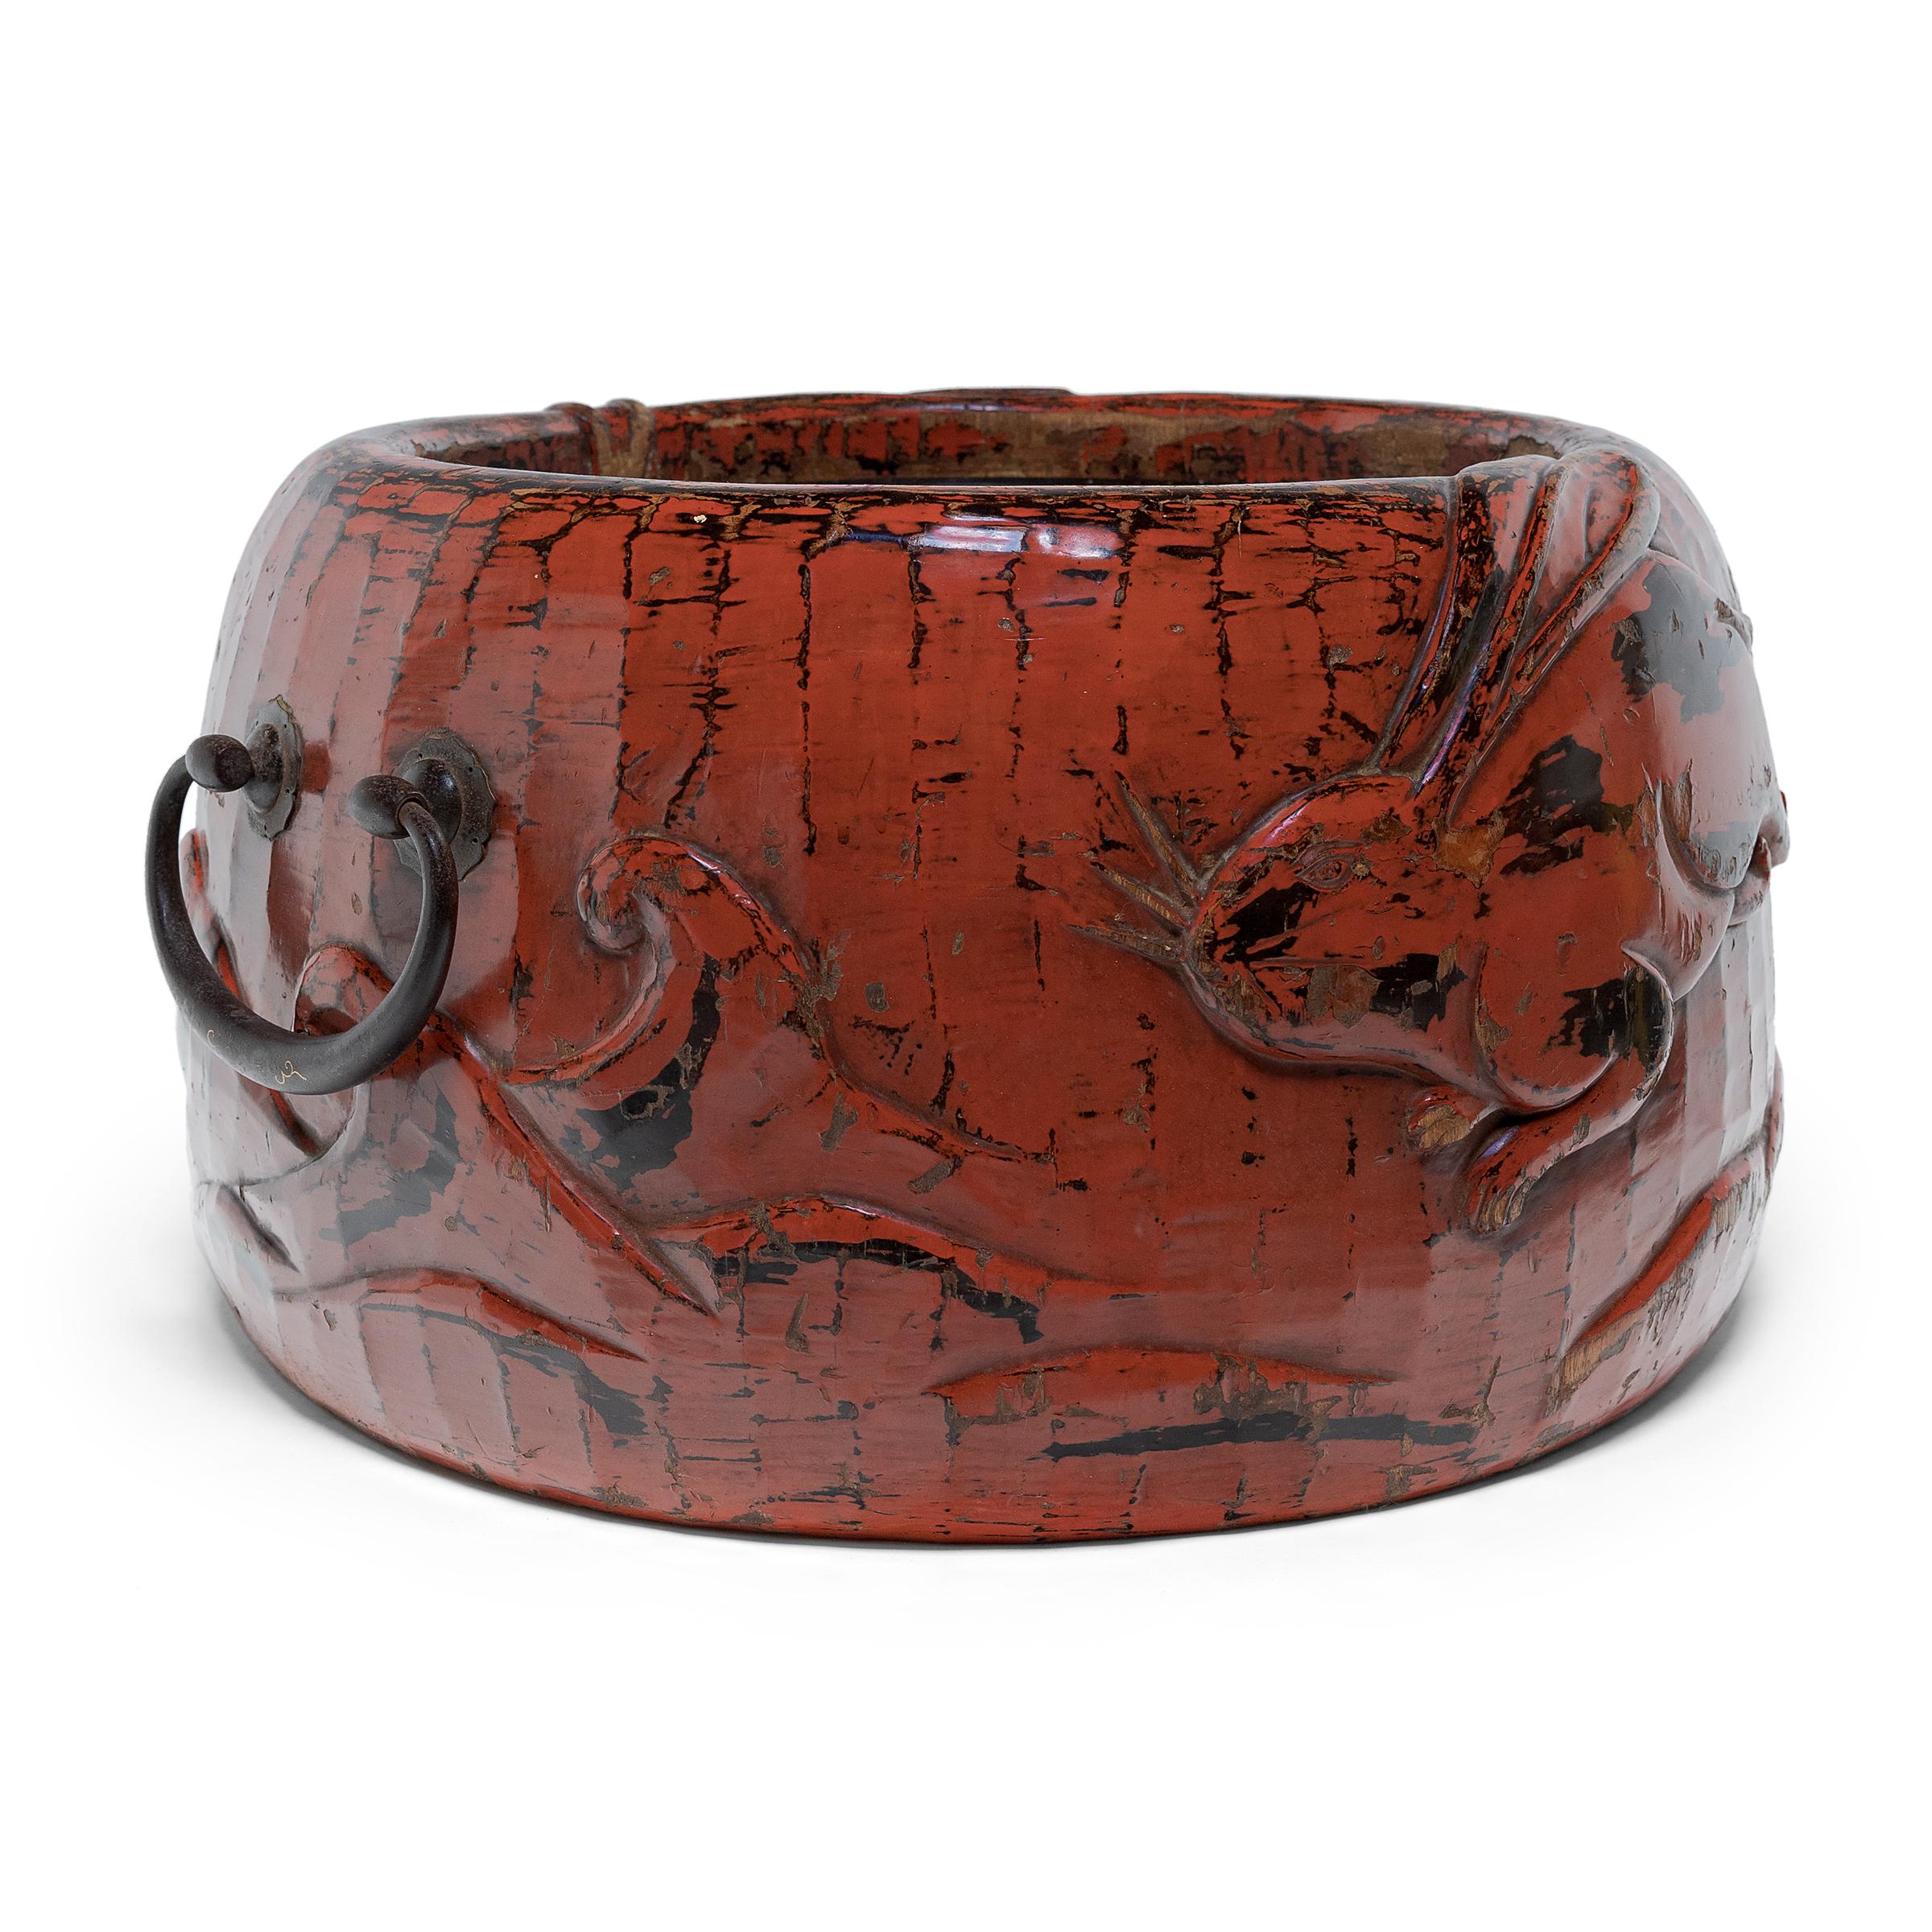 With monumental scale and beautiful, hand-carved details, this remarkable red lacquer hibachi is a true work of art. Designed to hold glowing embers, hibachi vessels such as this were used for cooking or as a source of heat in Japanese homes. Placed